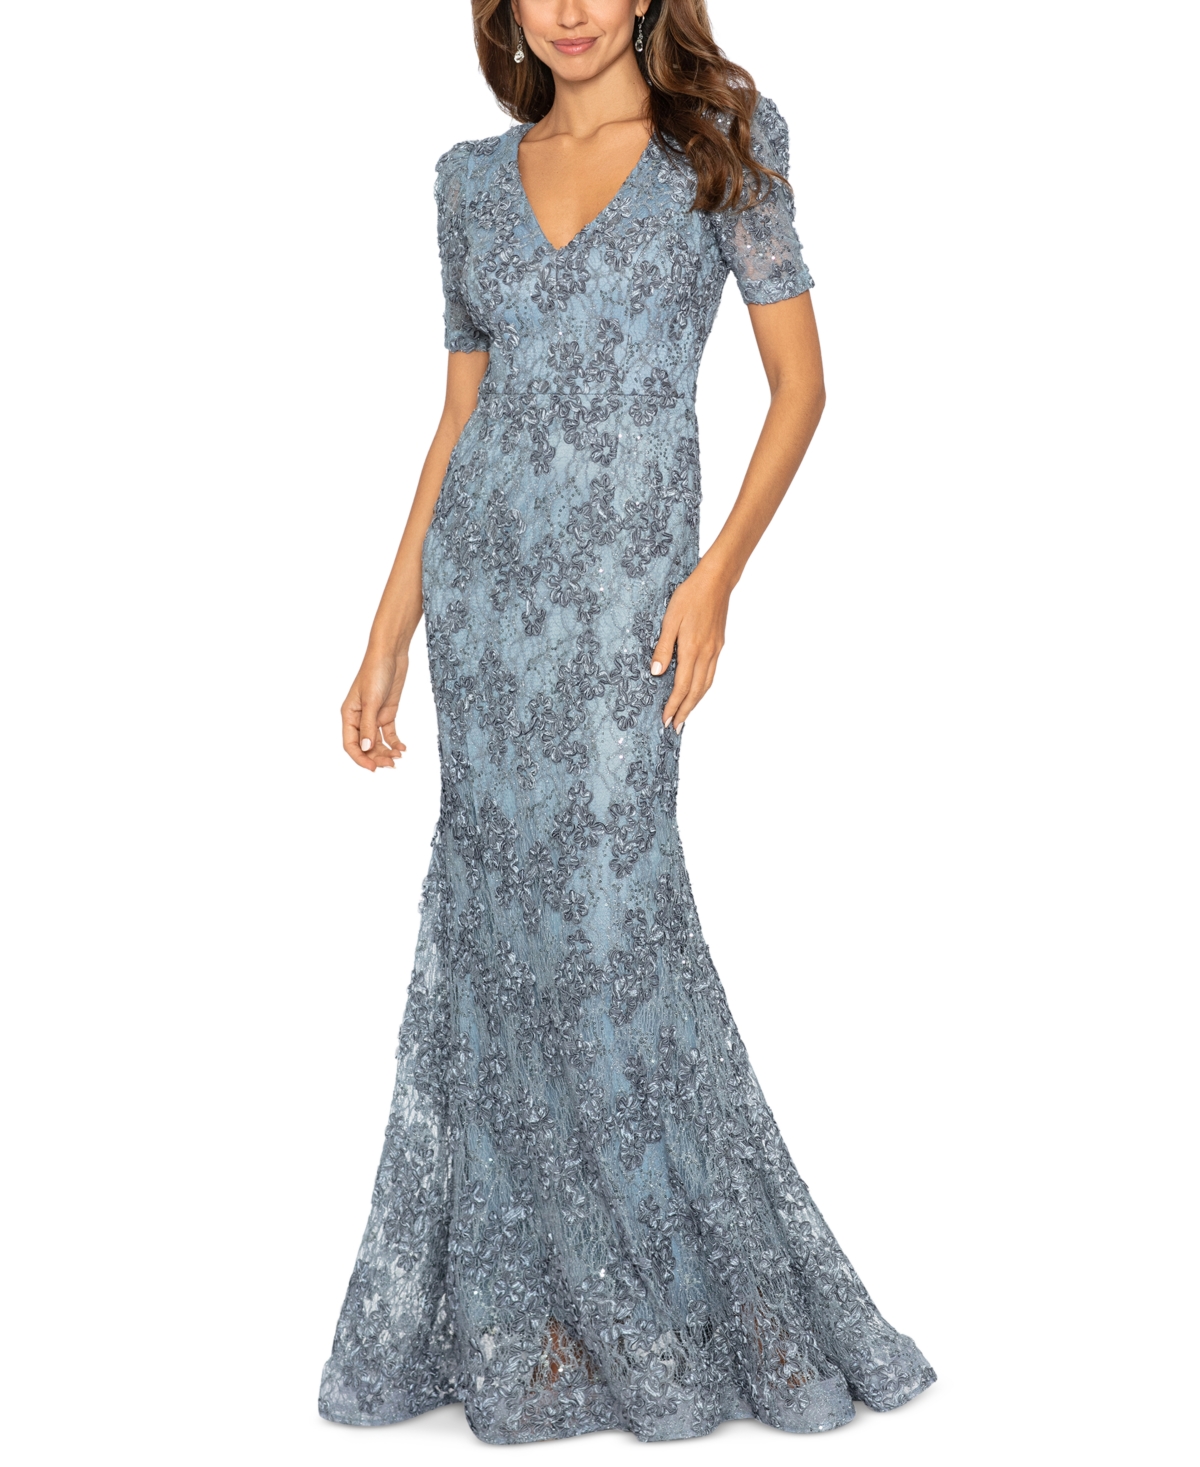 Women's Floral Soutache Sequin Puff-Sleeve Lace Gown - Taupe